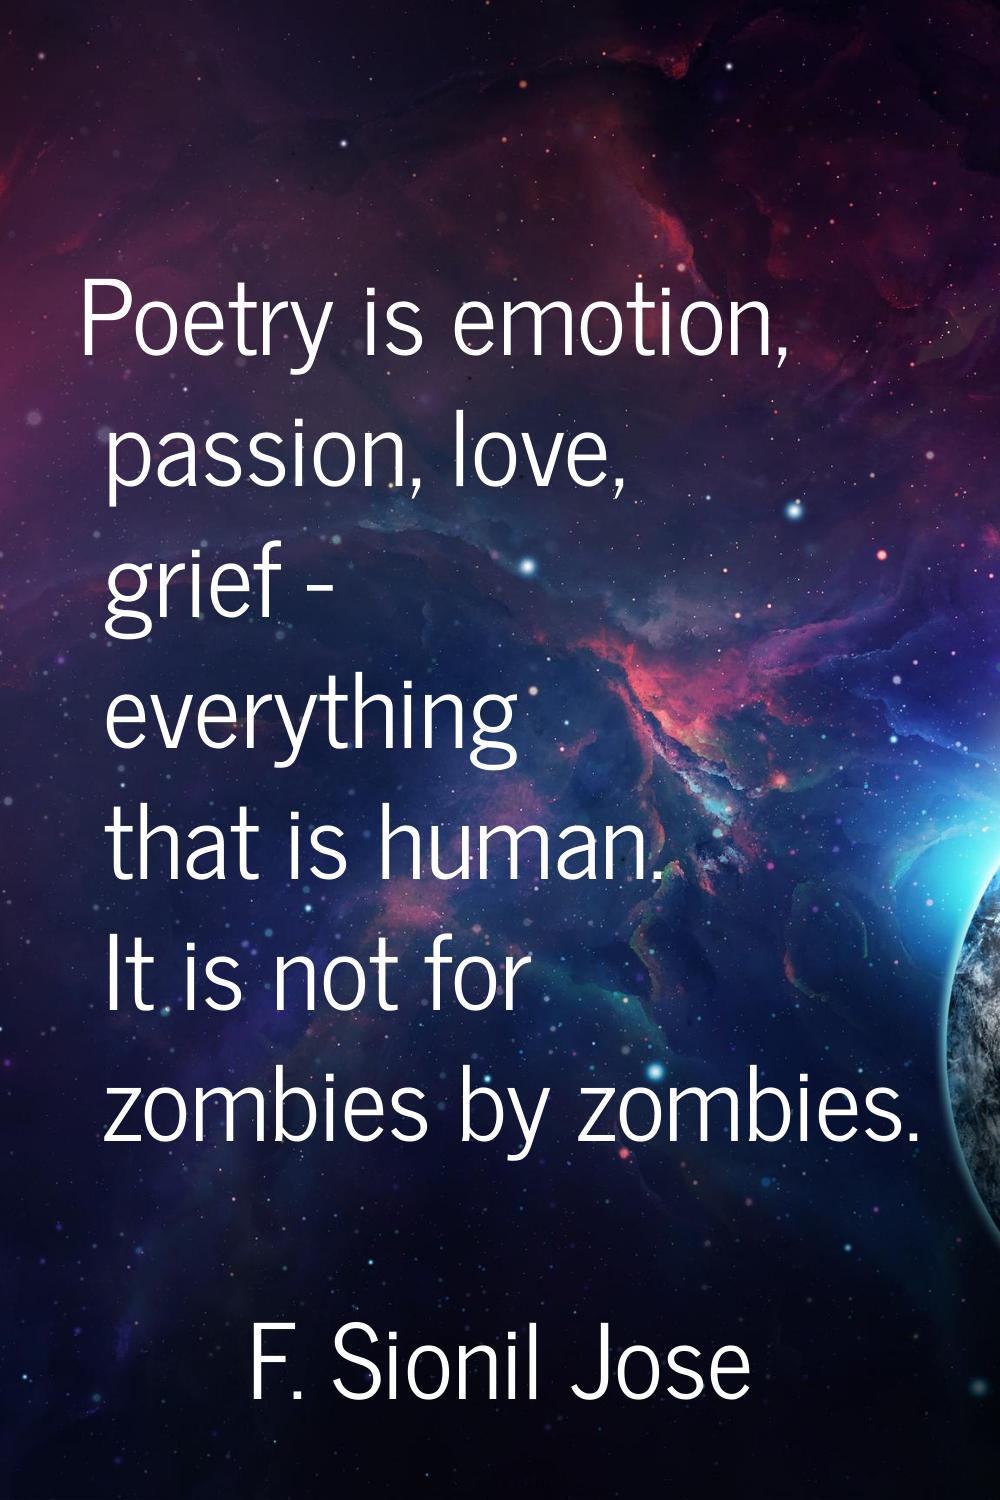 Poetry is emotion, passion, love, grief - everything that is human. It is not for zombies by zombie